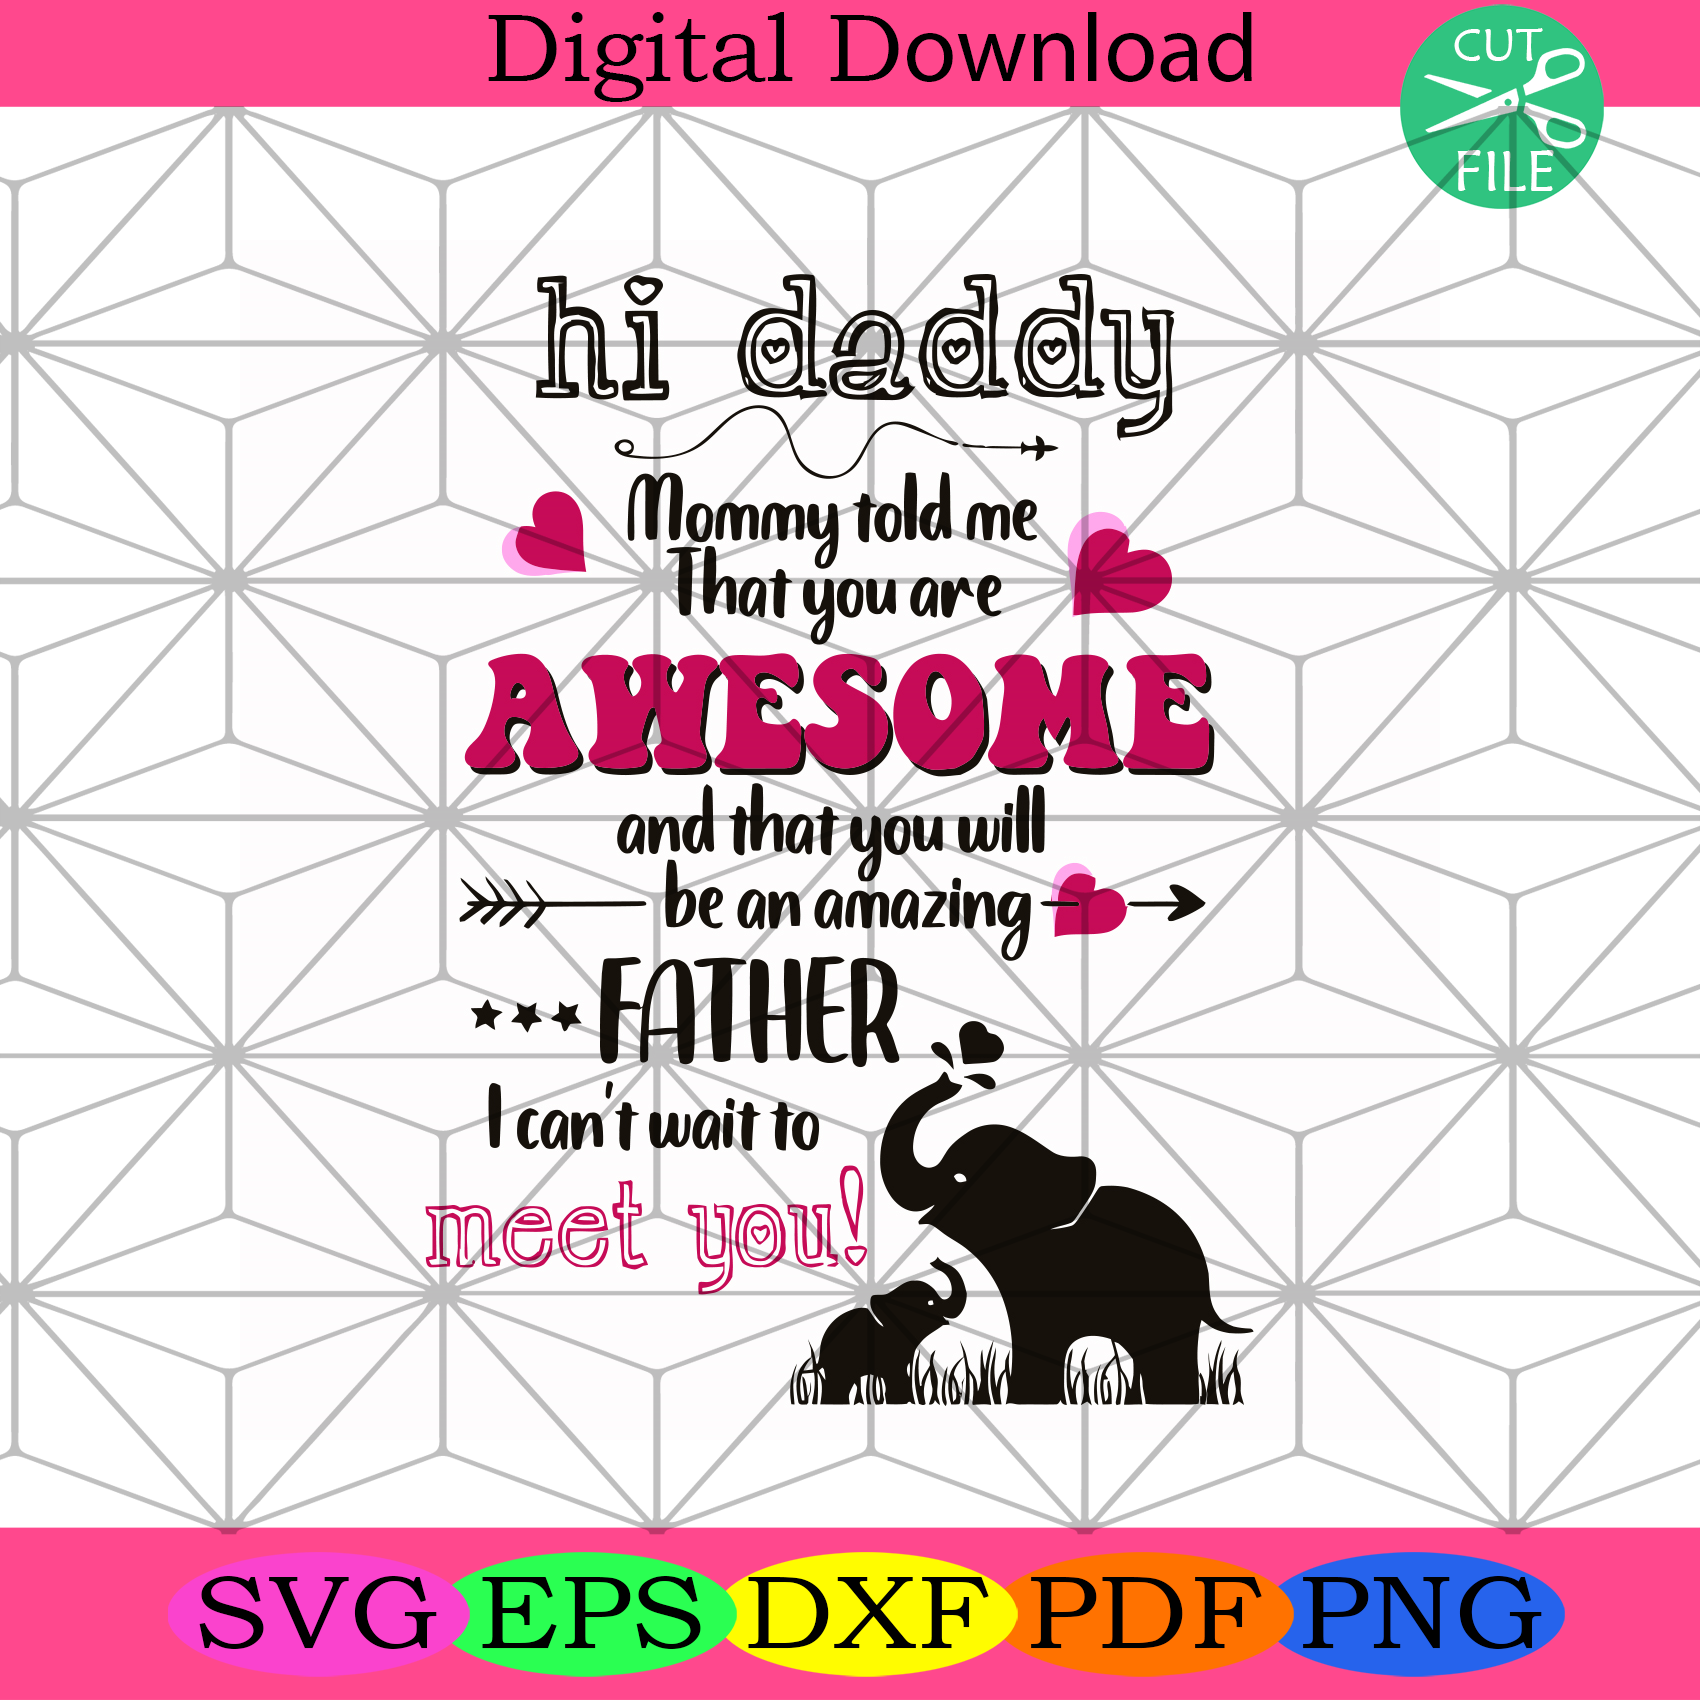 Daddy Mommy Told Me That You Are Awesome Svg Fathers Day Svg